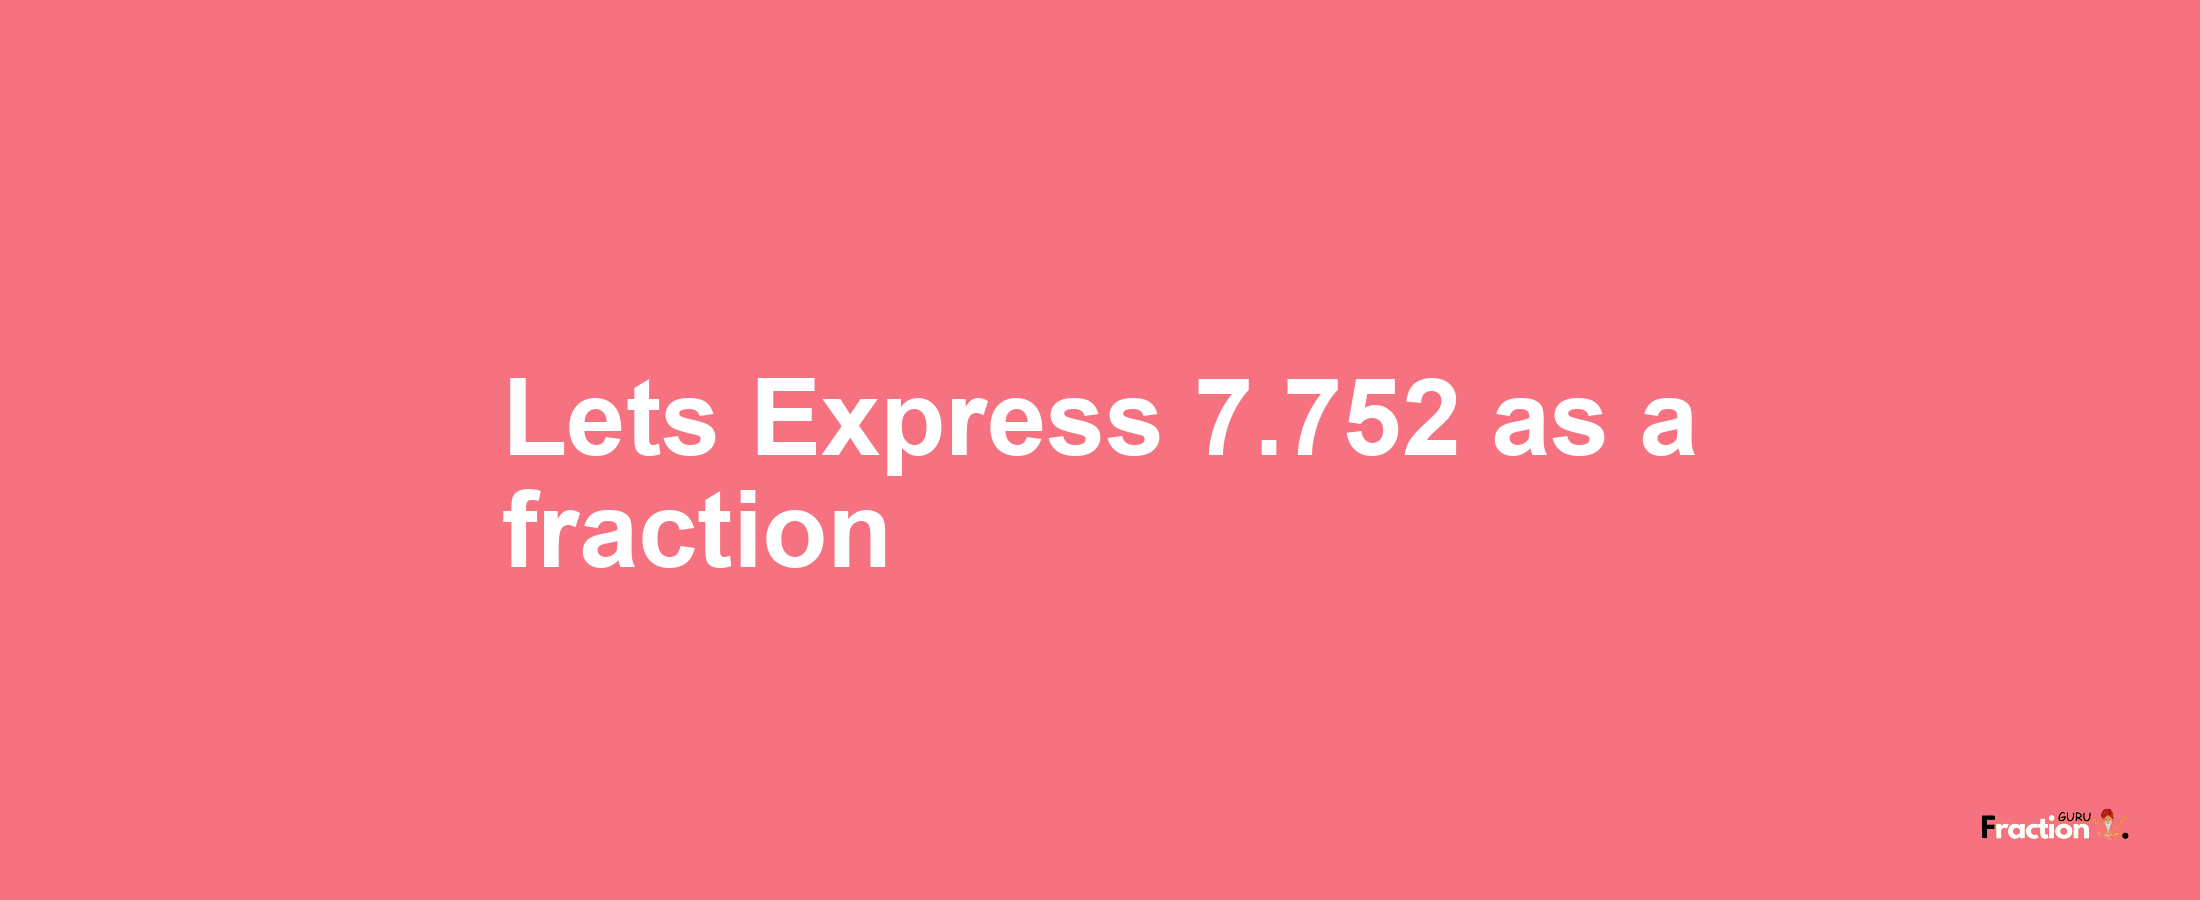 Lets Express 7.752 as afraction